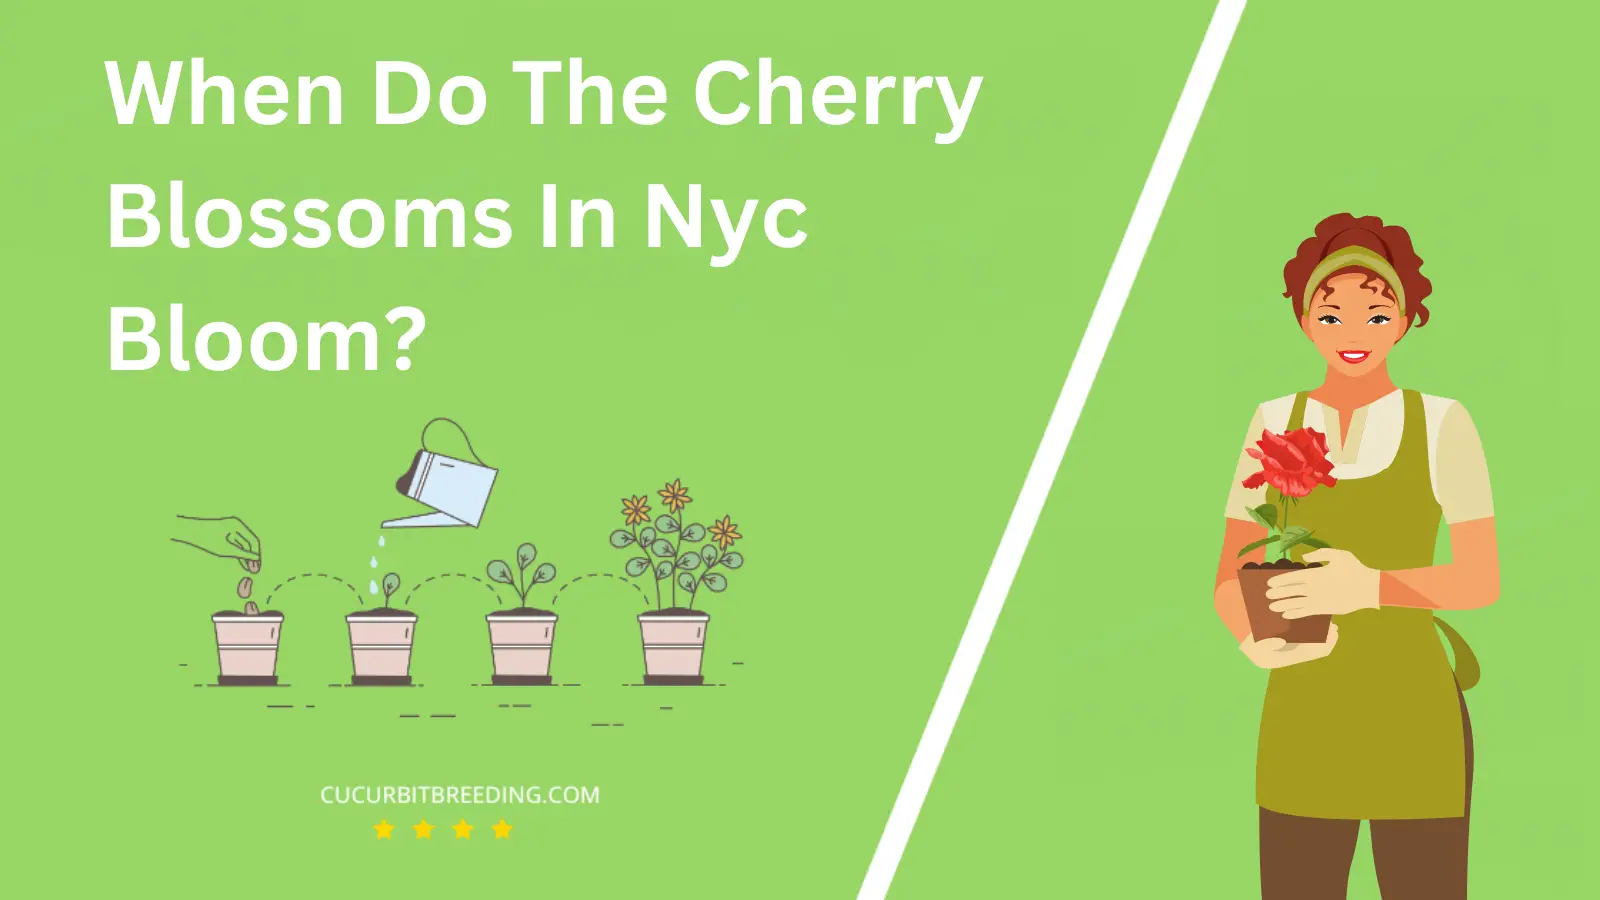 When Do The Cherry Blossoms In Nyc Bloom?